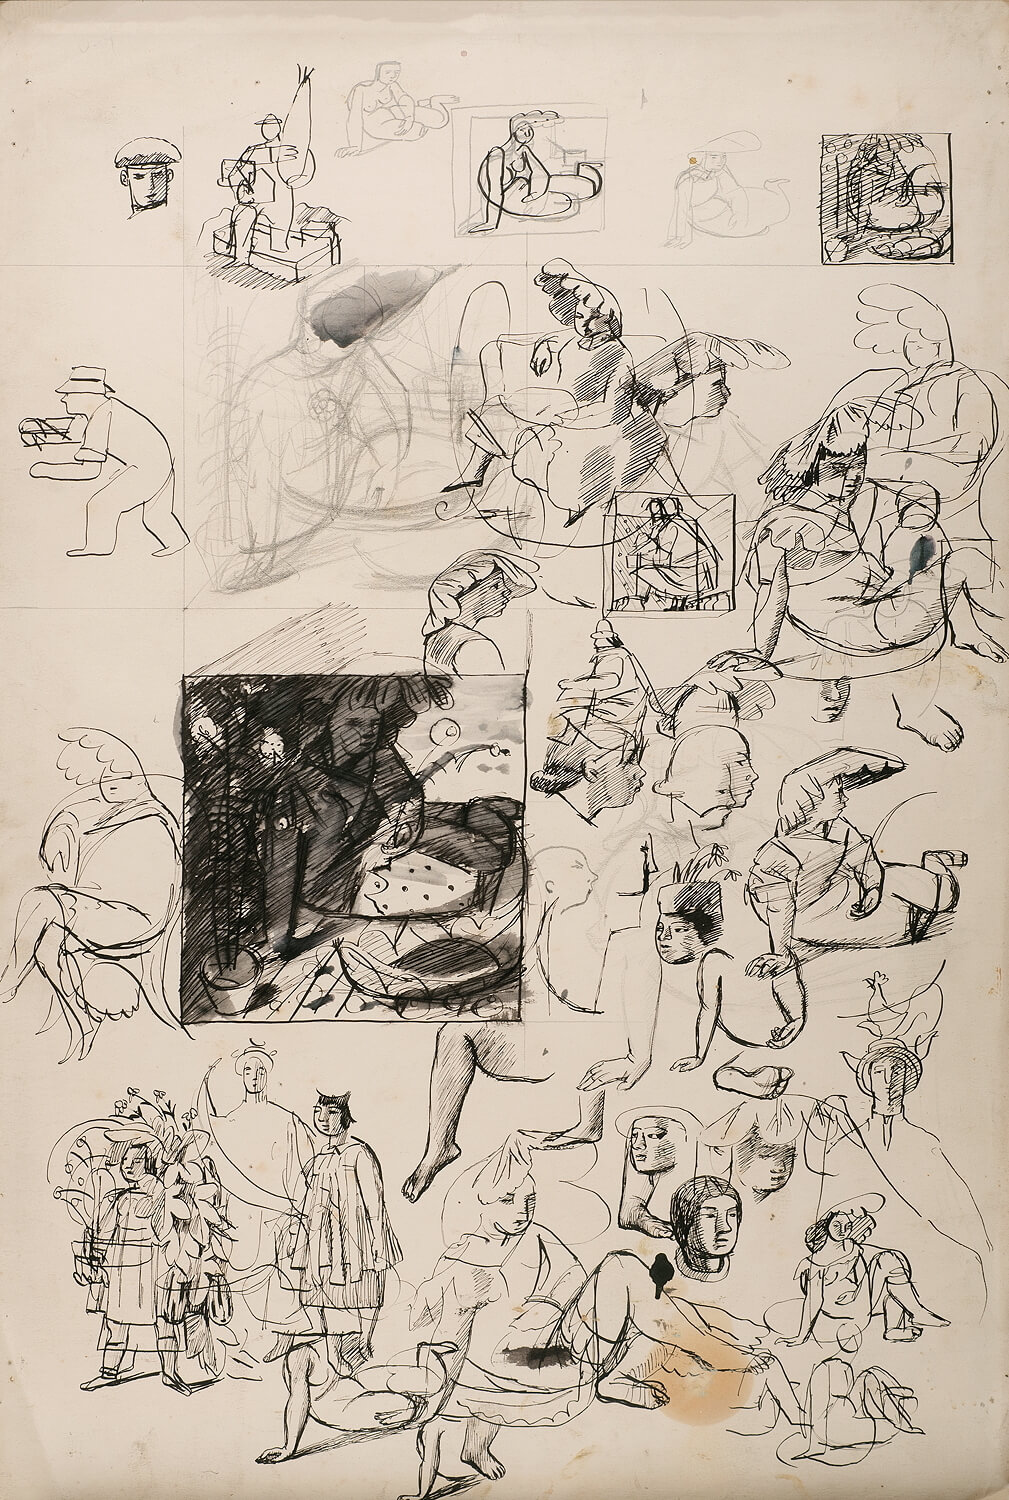 Evelyn Dunbar - Sheet of studies possibly related to the Bletchley Park Training College murals